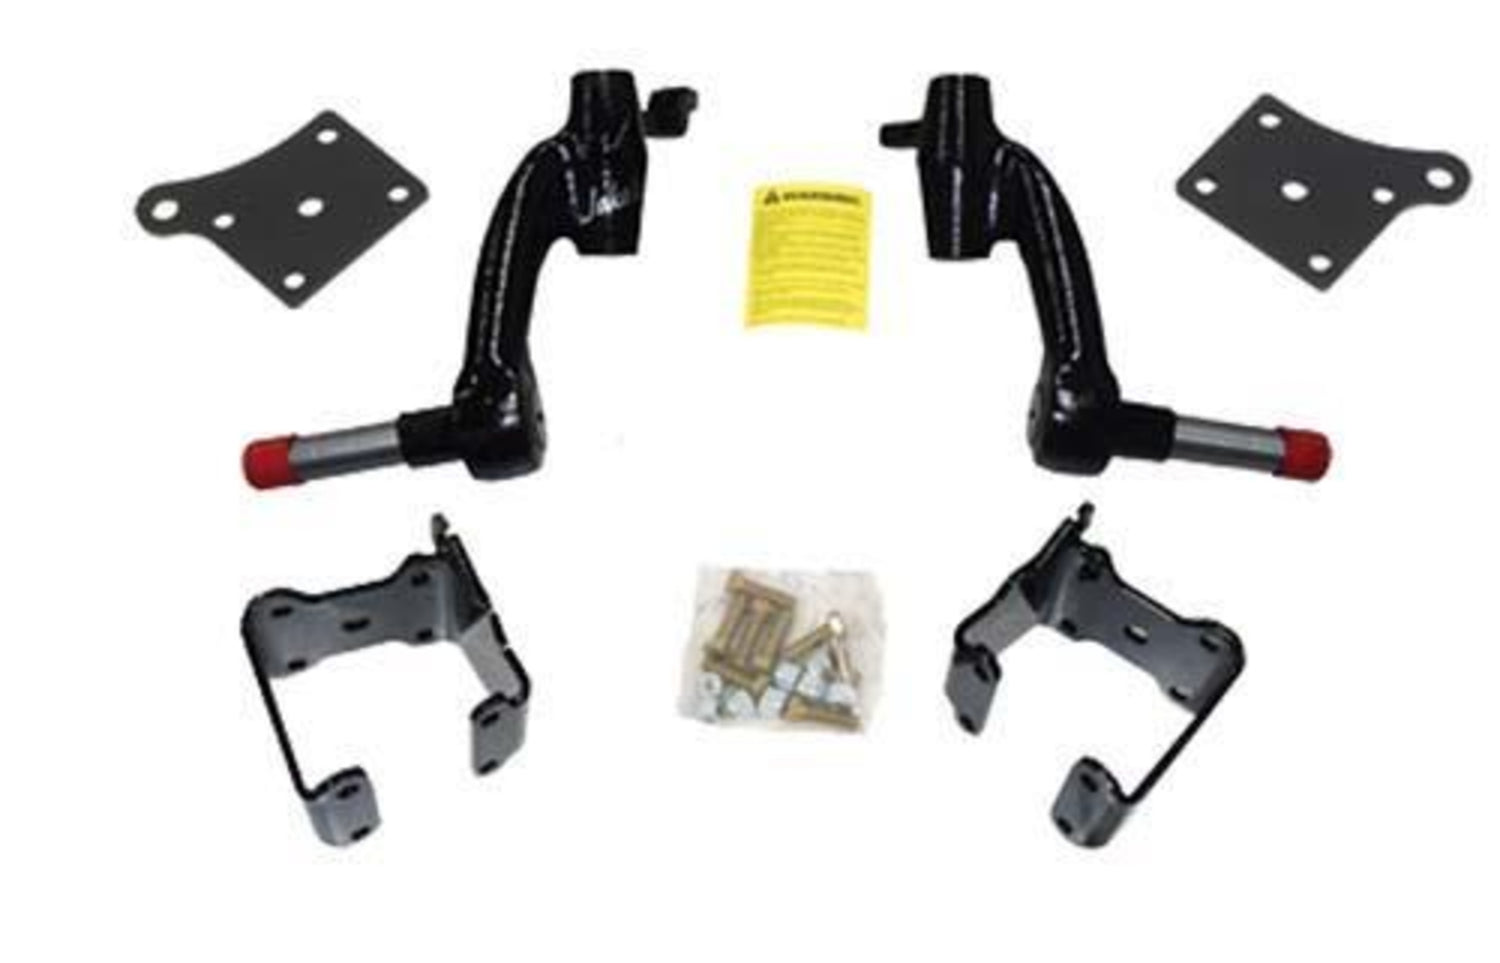 Jake's‚Ñ¢ 6" E-Z-GO Workhorse Gas Spindle Lift Kit (Years 2001.5-2008.5)